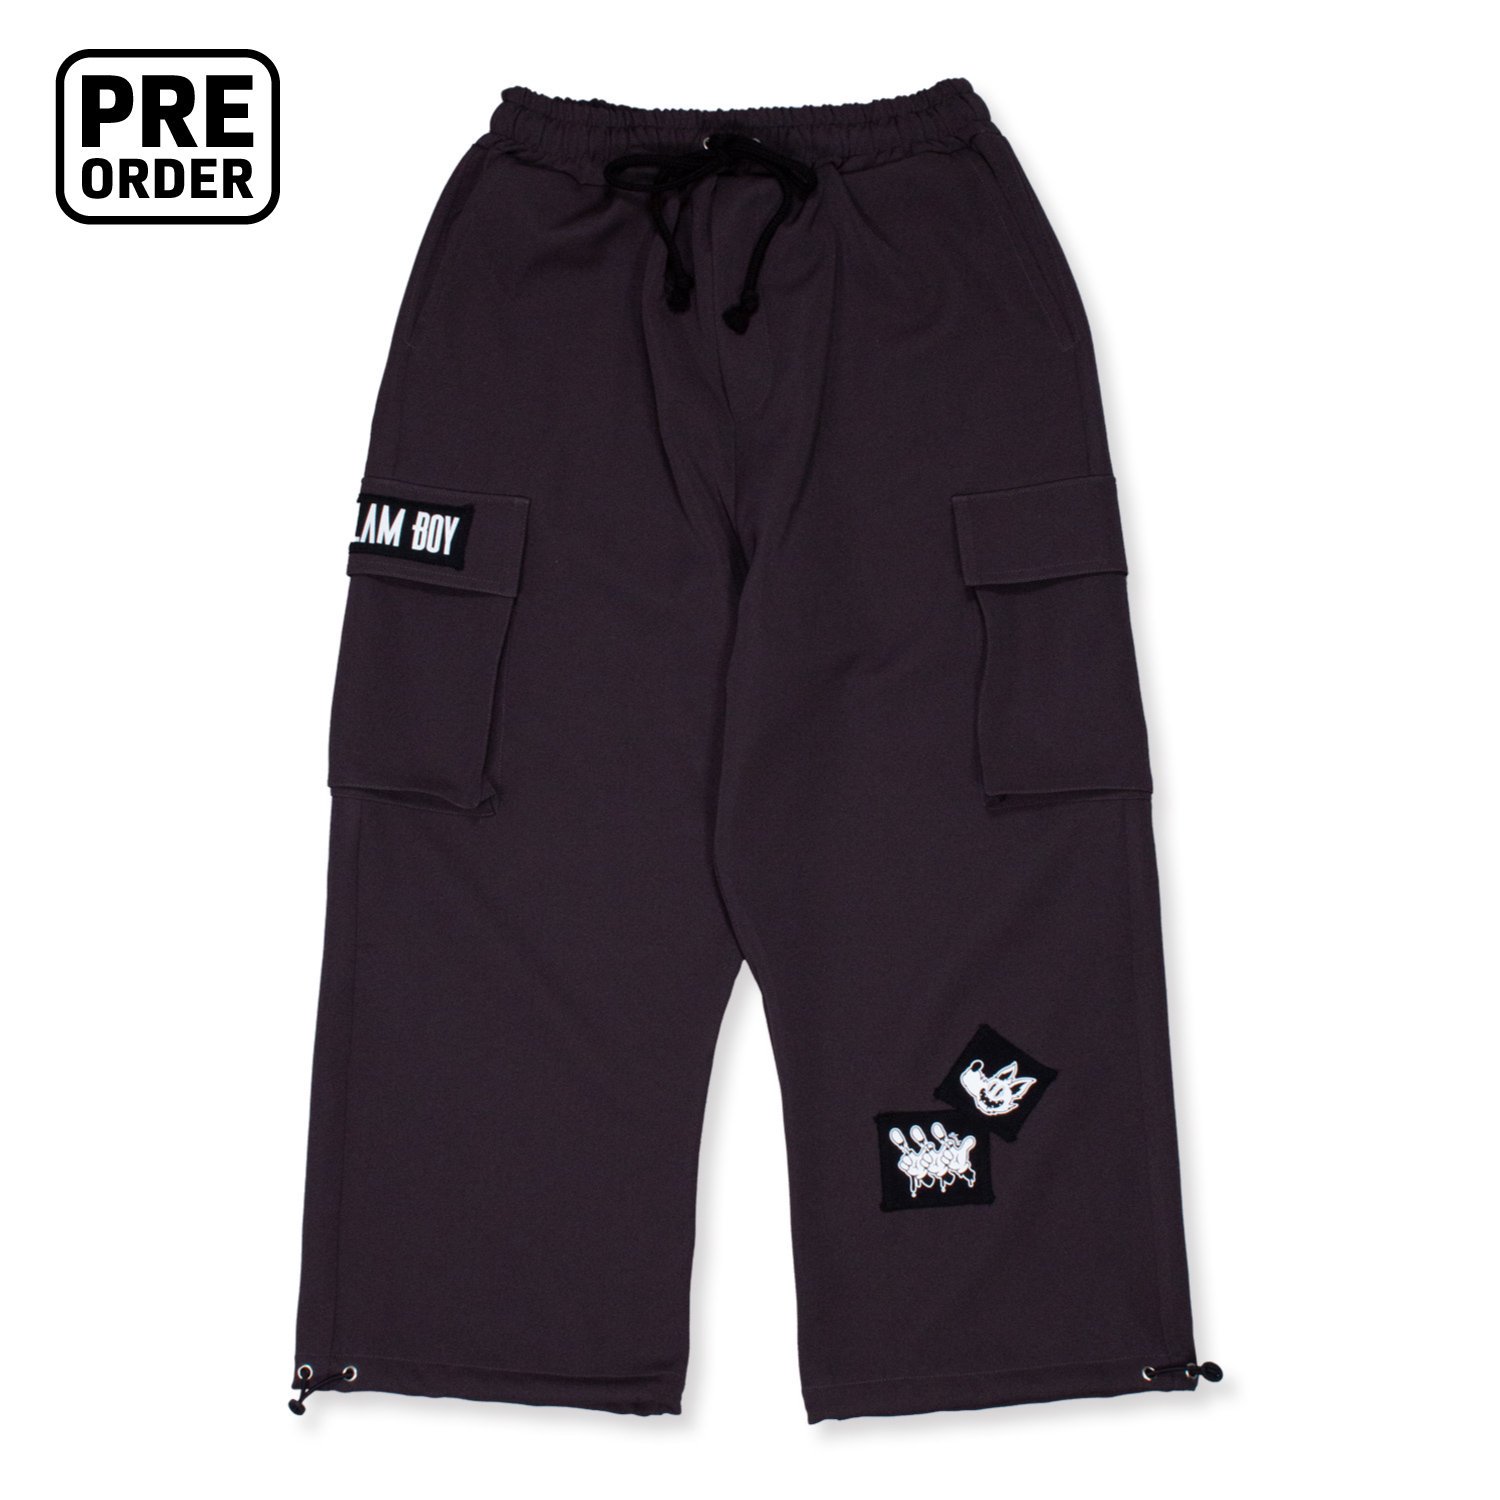 <img class='new_mark_img1' src='https://img.shop-pro.jp/img/new/icons8.gif' style='border:none;display:inline;margin:0px;padding:0px;width:auto;' />CARGO PANTS / 㥳